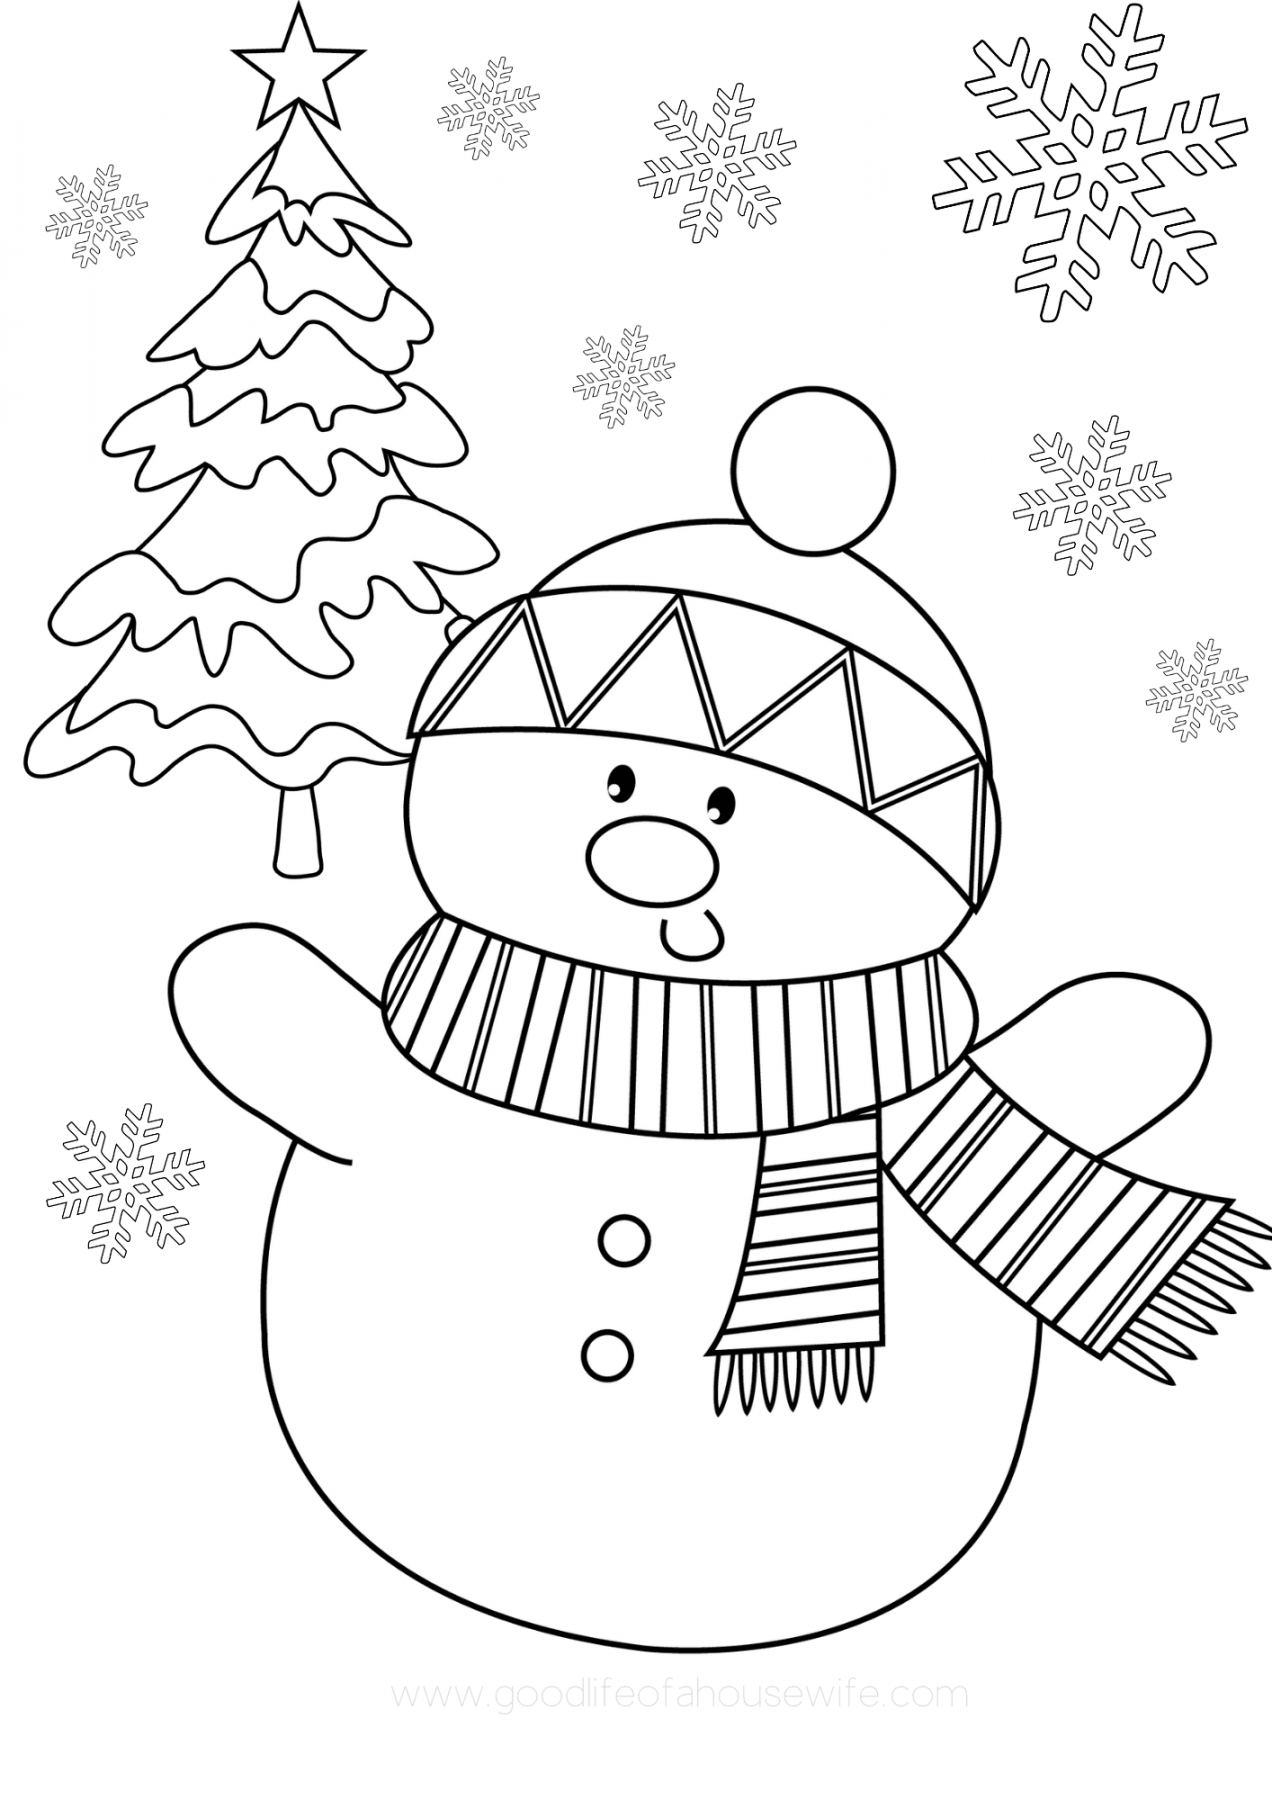 Christmas Free Printables Coloring Pages - Printable - Free Printable Christmas Coloring Pages - Good Life of a Housewife